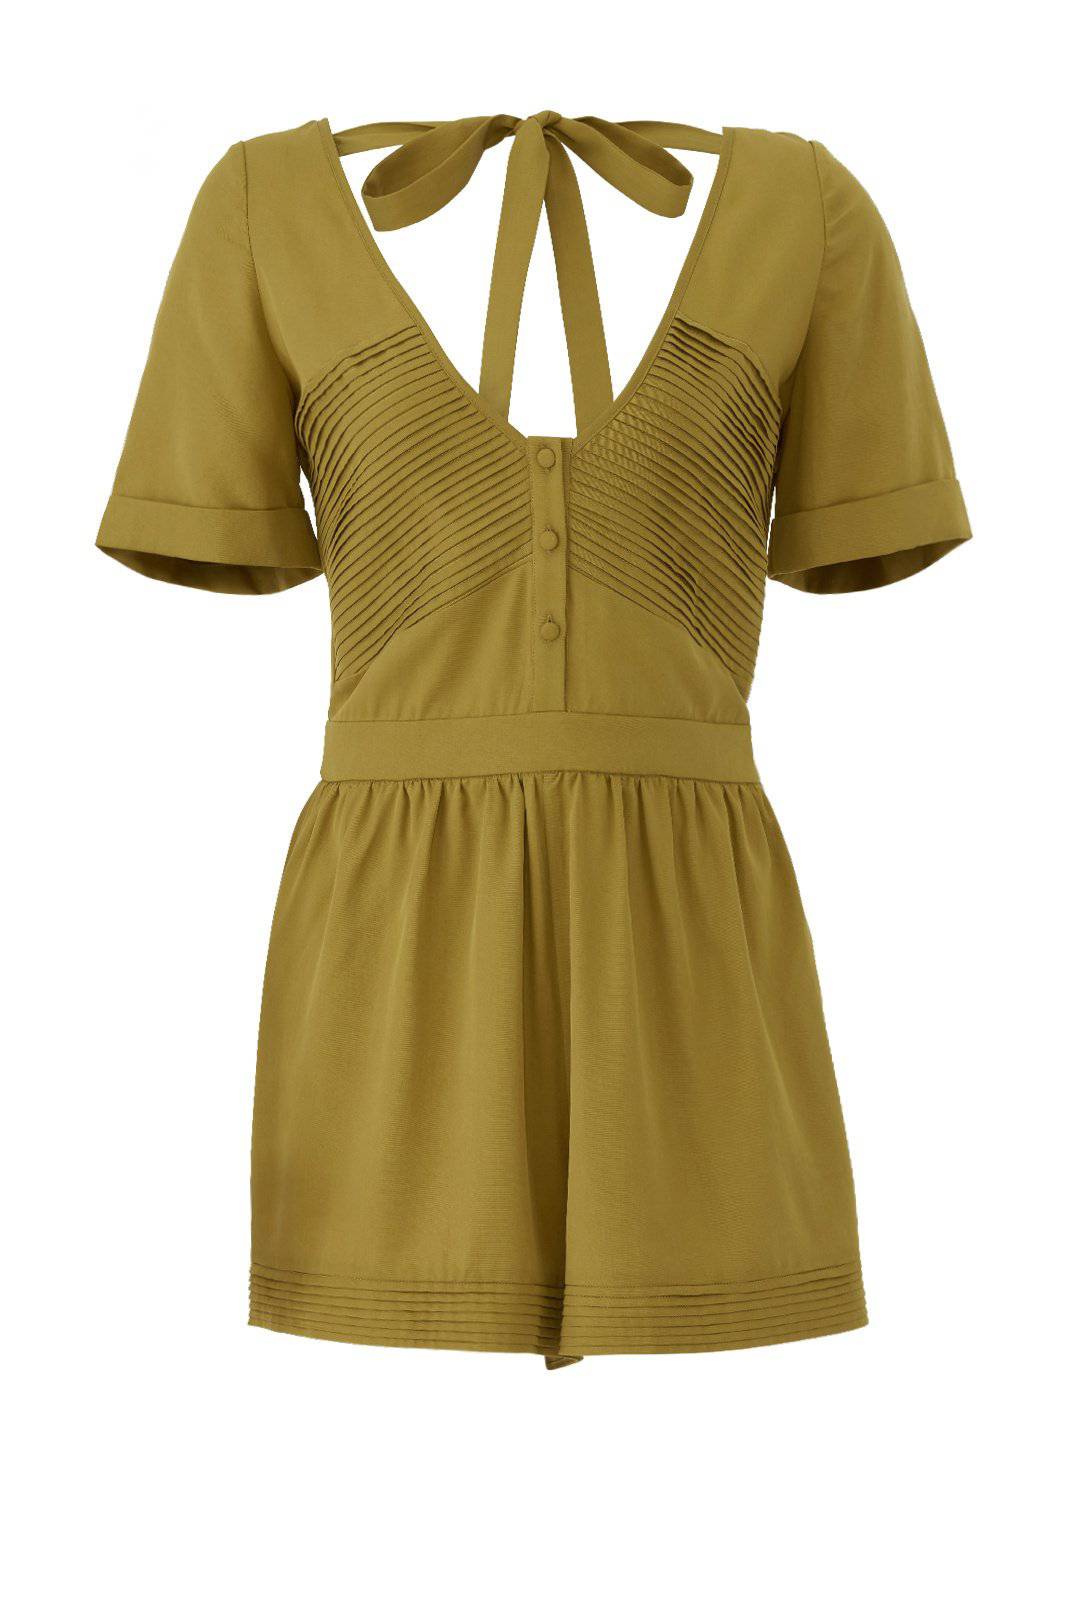 The Luella Playsuit - South of London